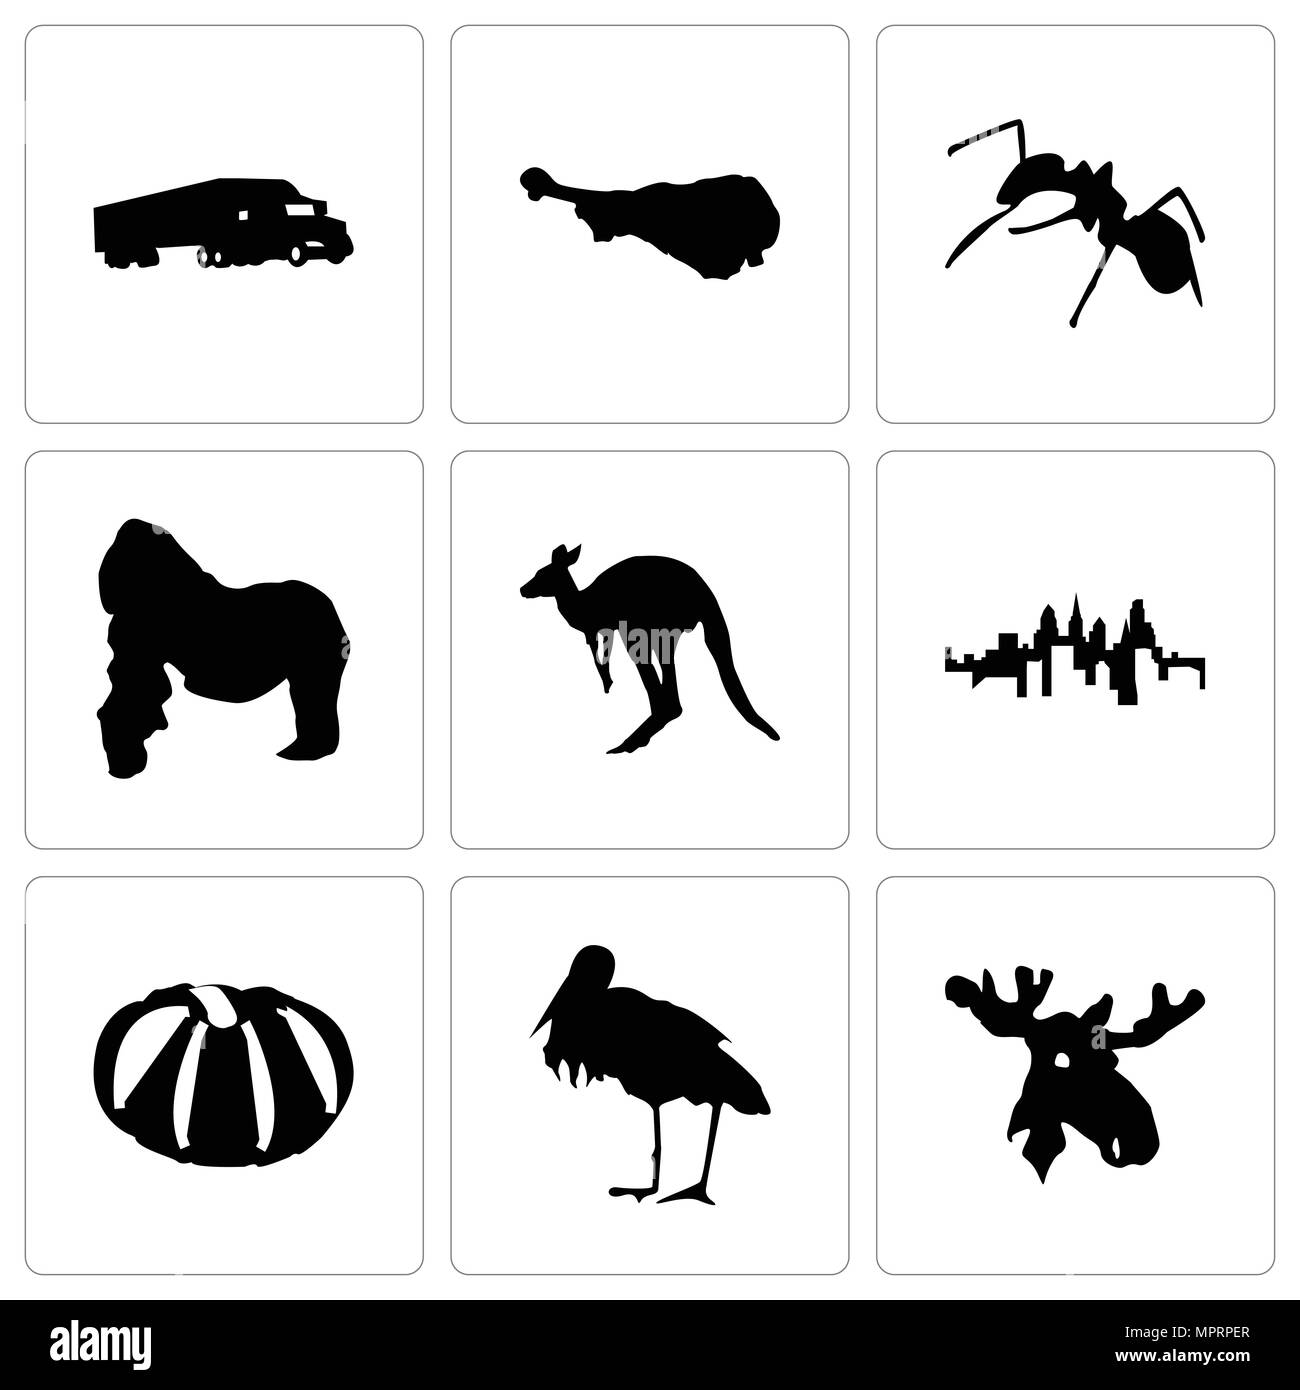 Set Of 9 simple editable icons such as moose head, stork, pumpkin, pennsylvania state, kangaroo, gorilla, ant, turkey leg, semi truck, can be used for Stock Vector